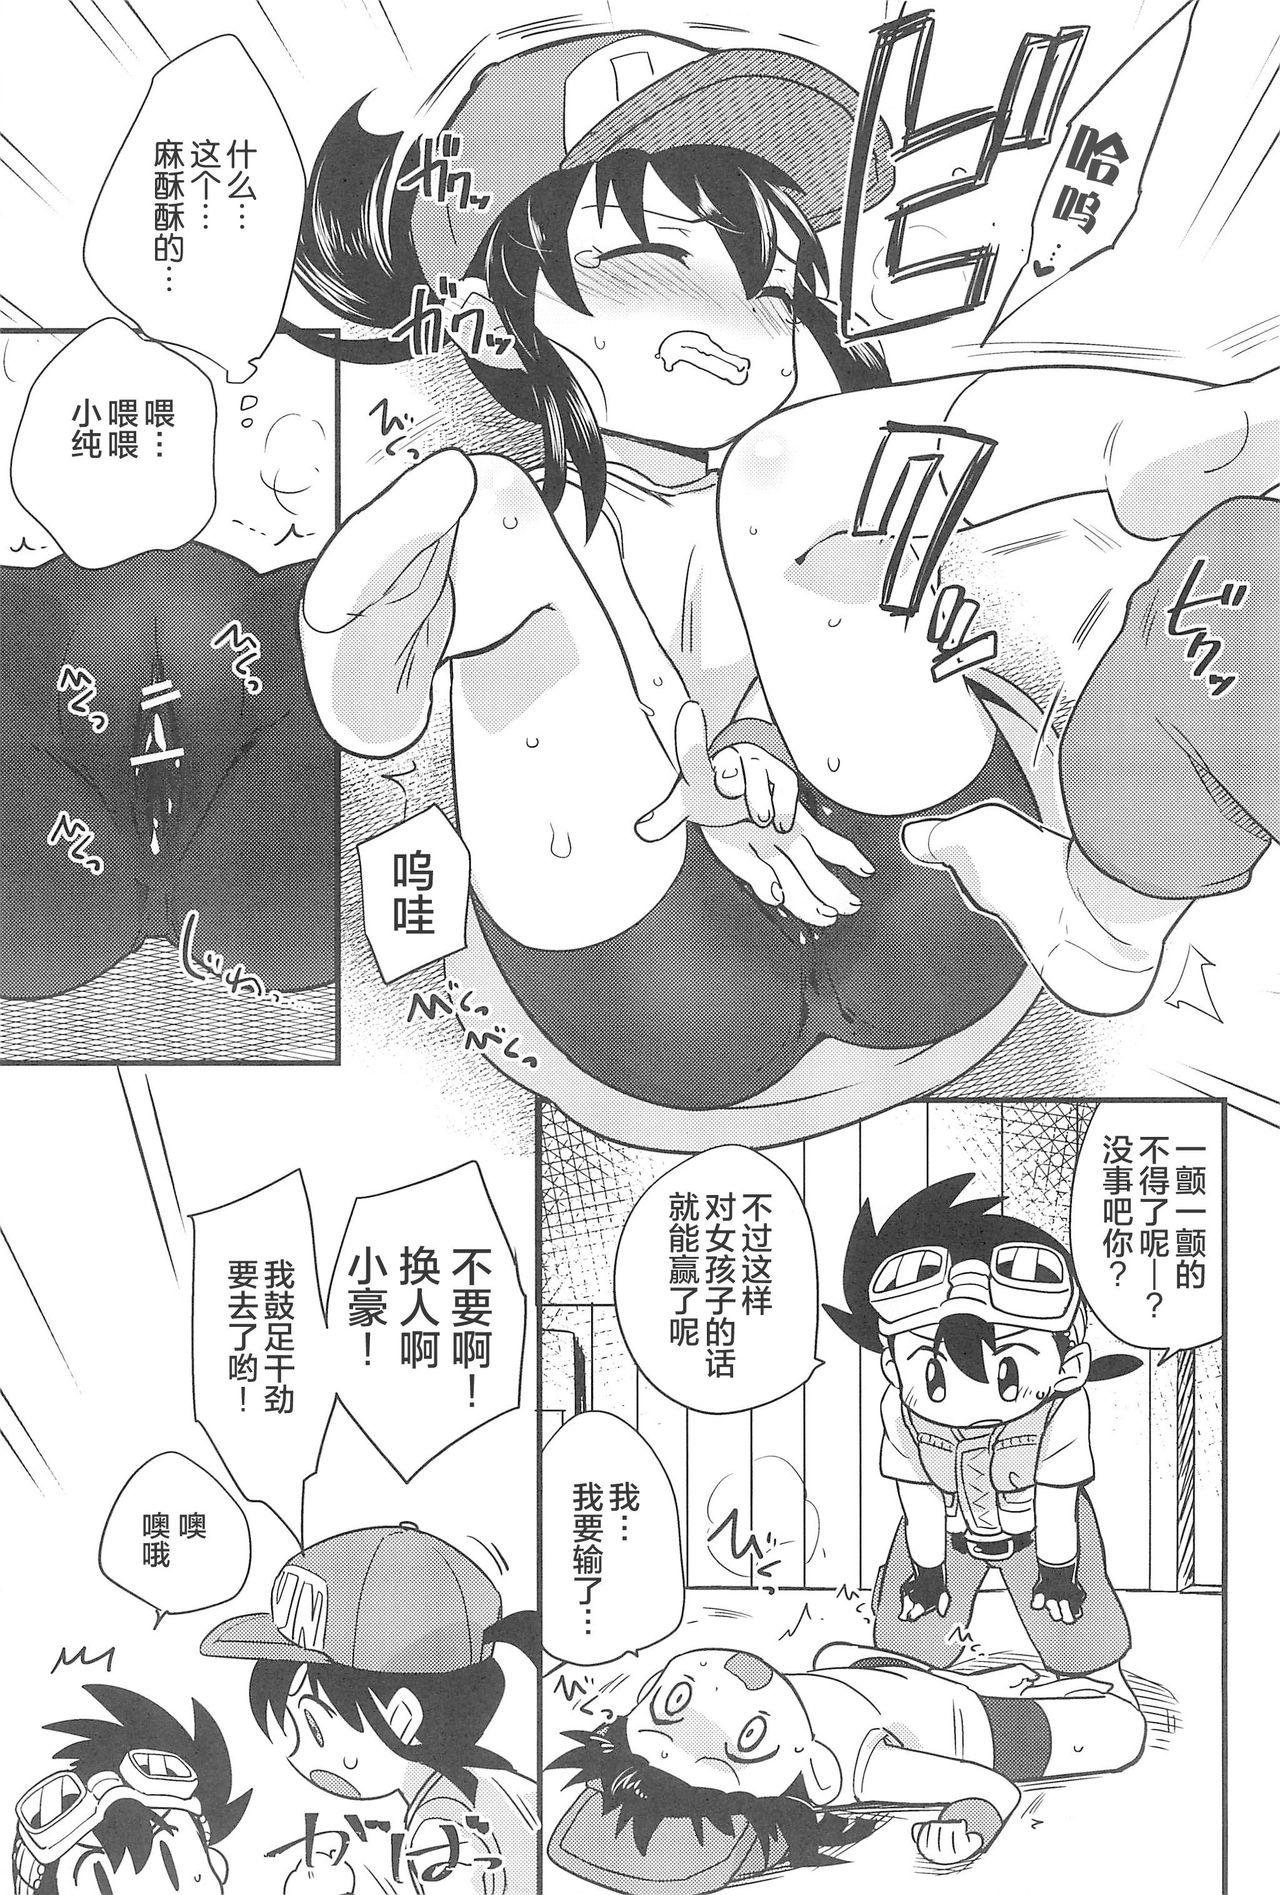 Swallow Denki no Chikaratte Sugee! - Bakusou kyoudai lets and go Bus - Page 9